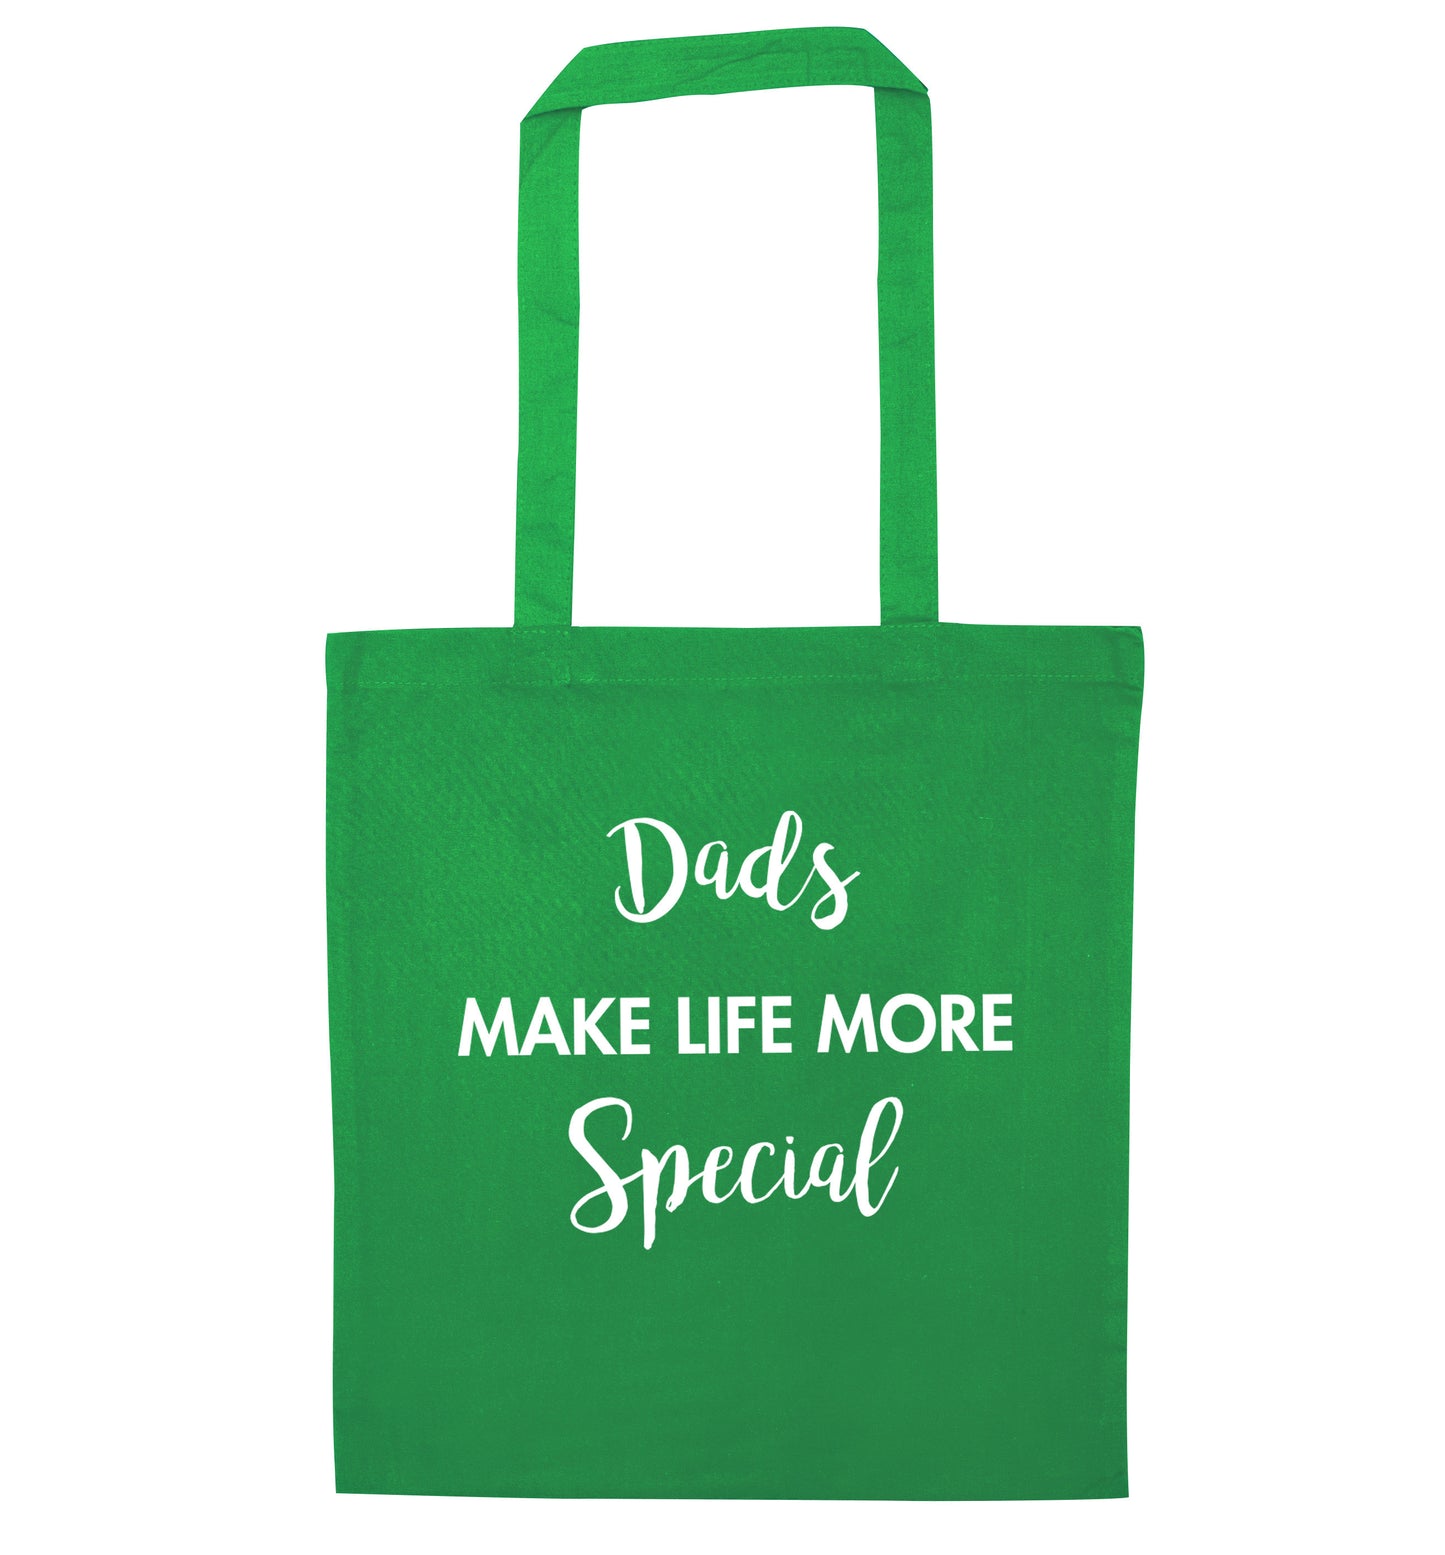 Dads make life more special green tote bag